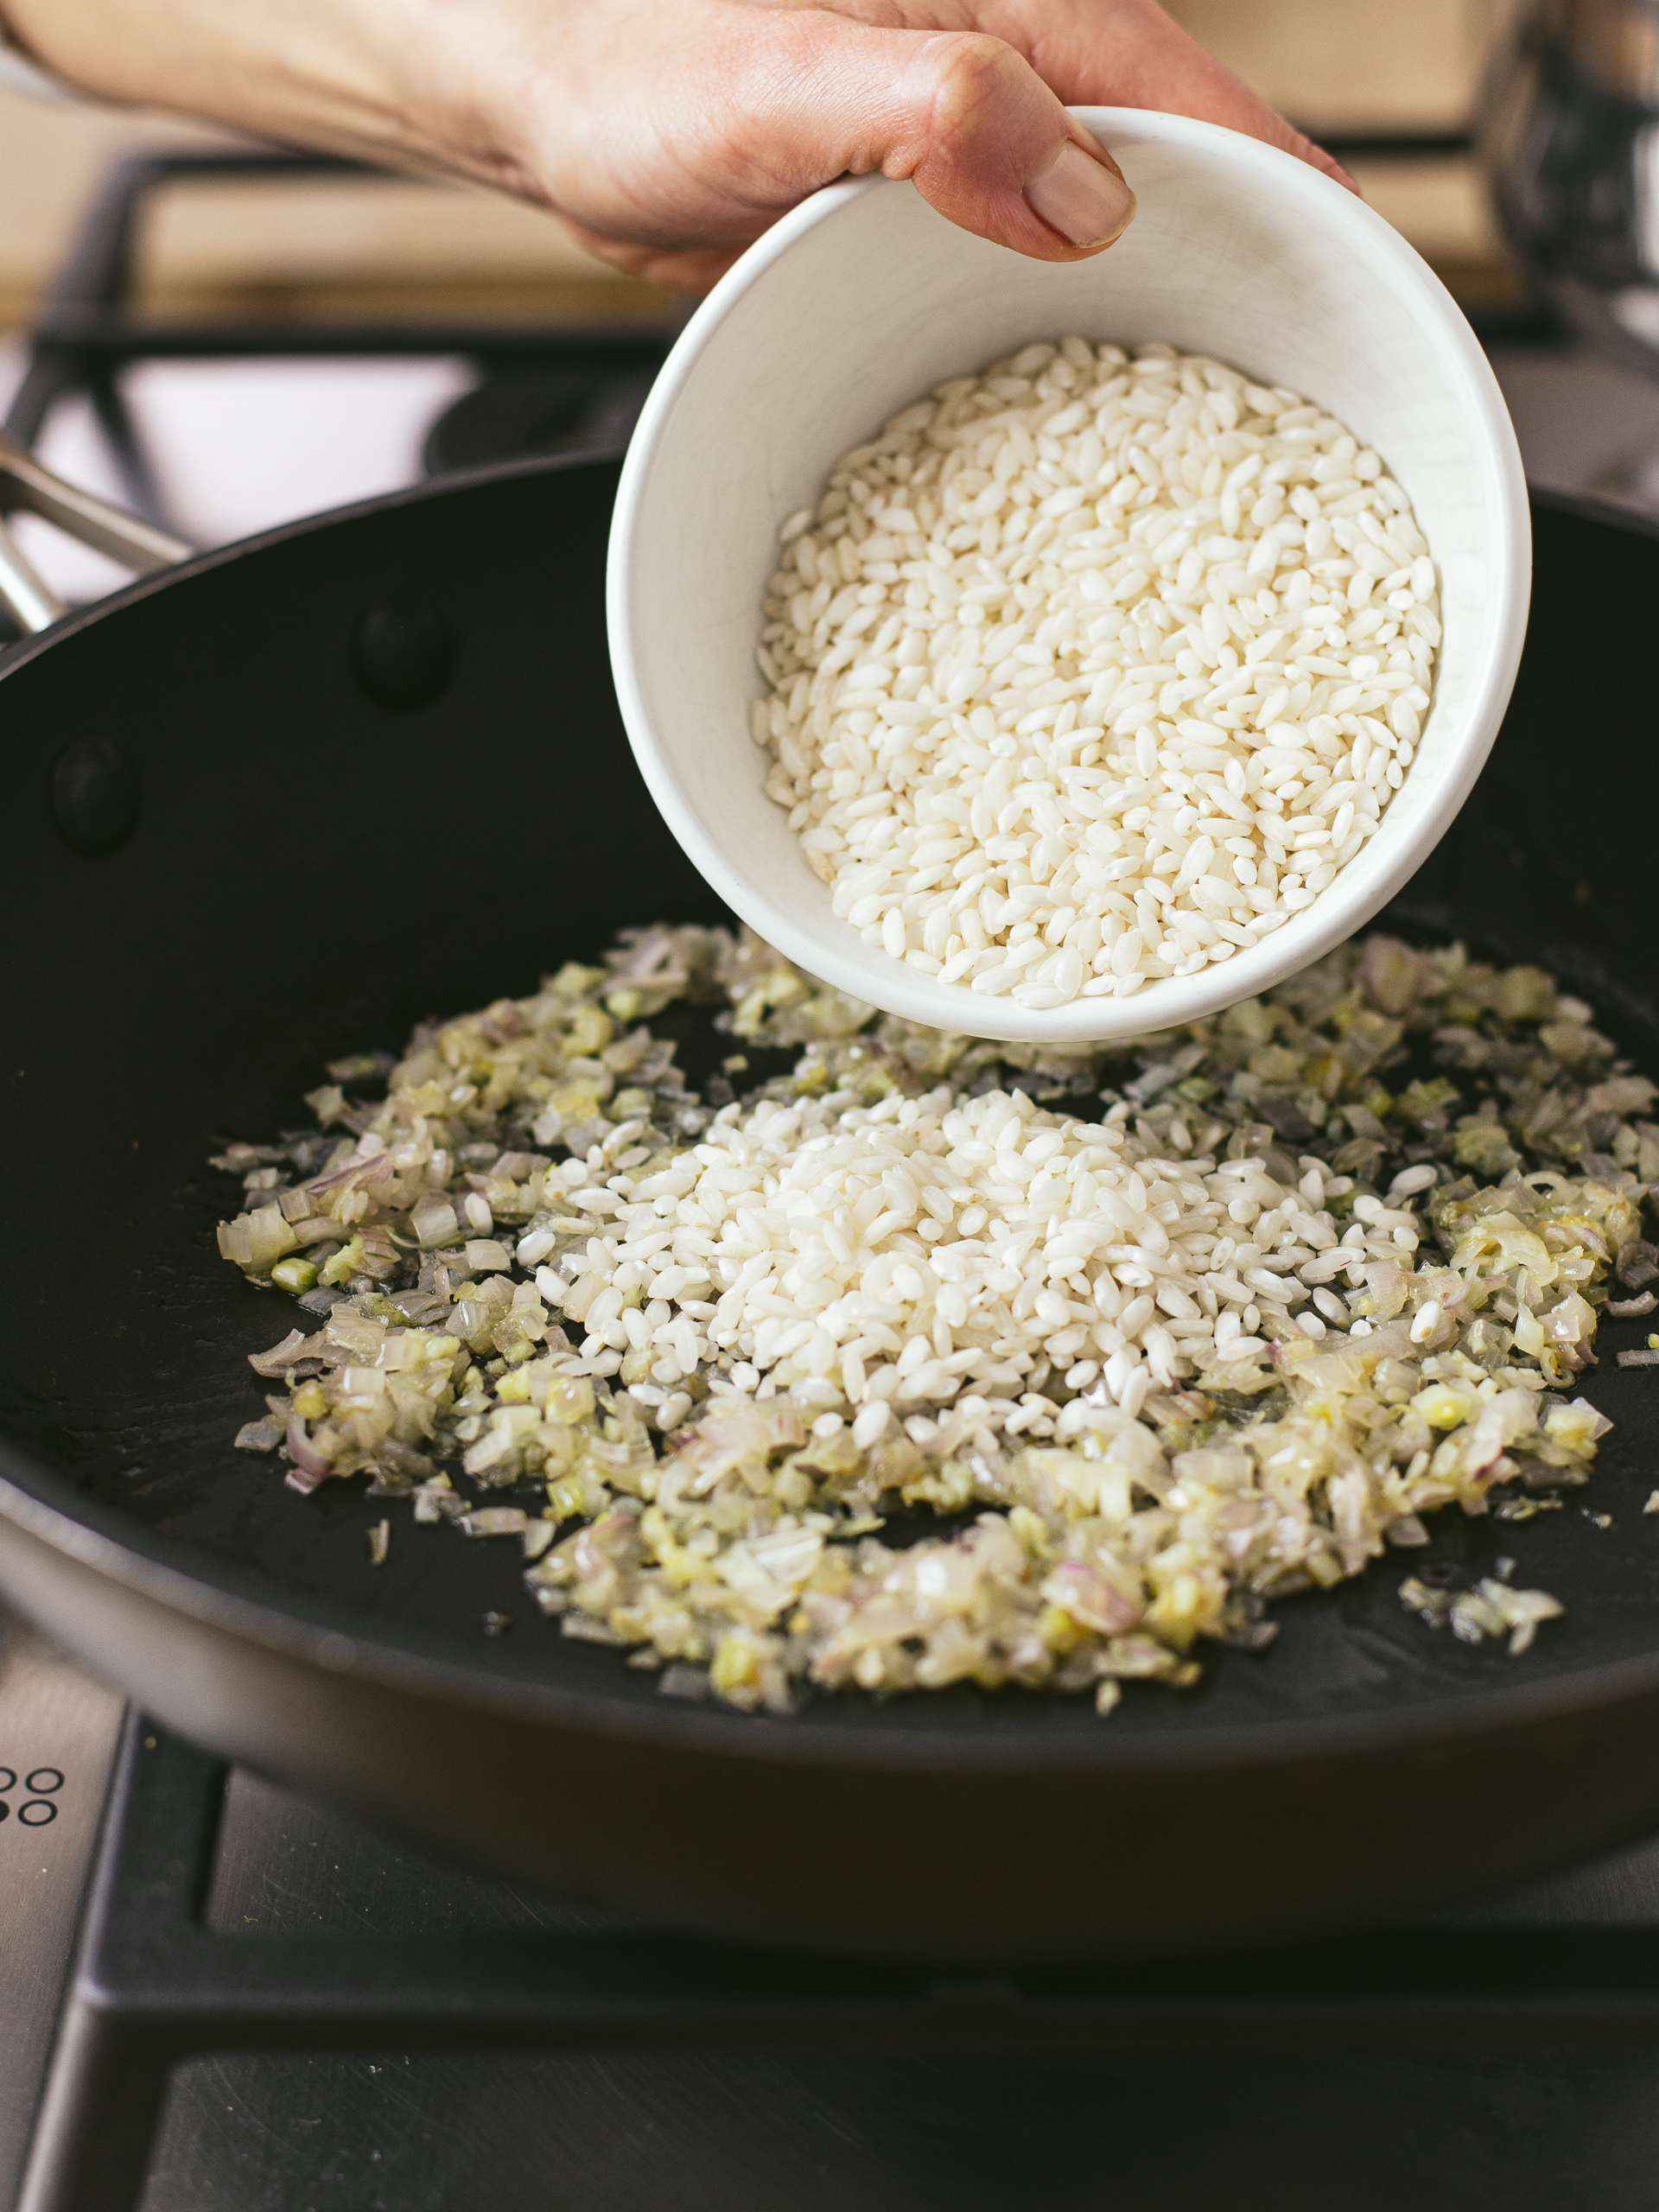 risotto rice added to cooked onions in a skillet